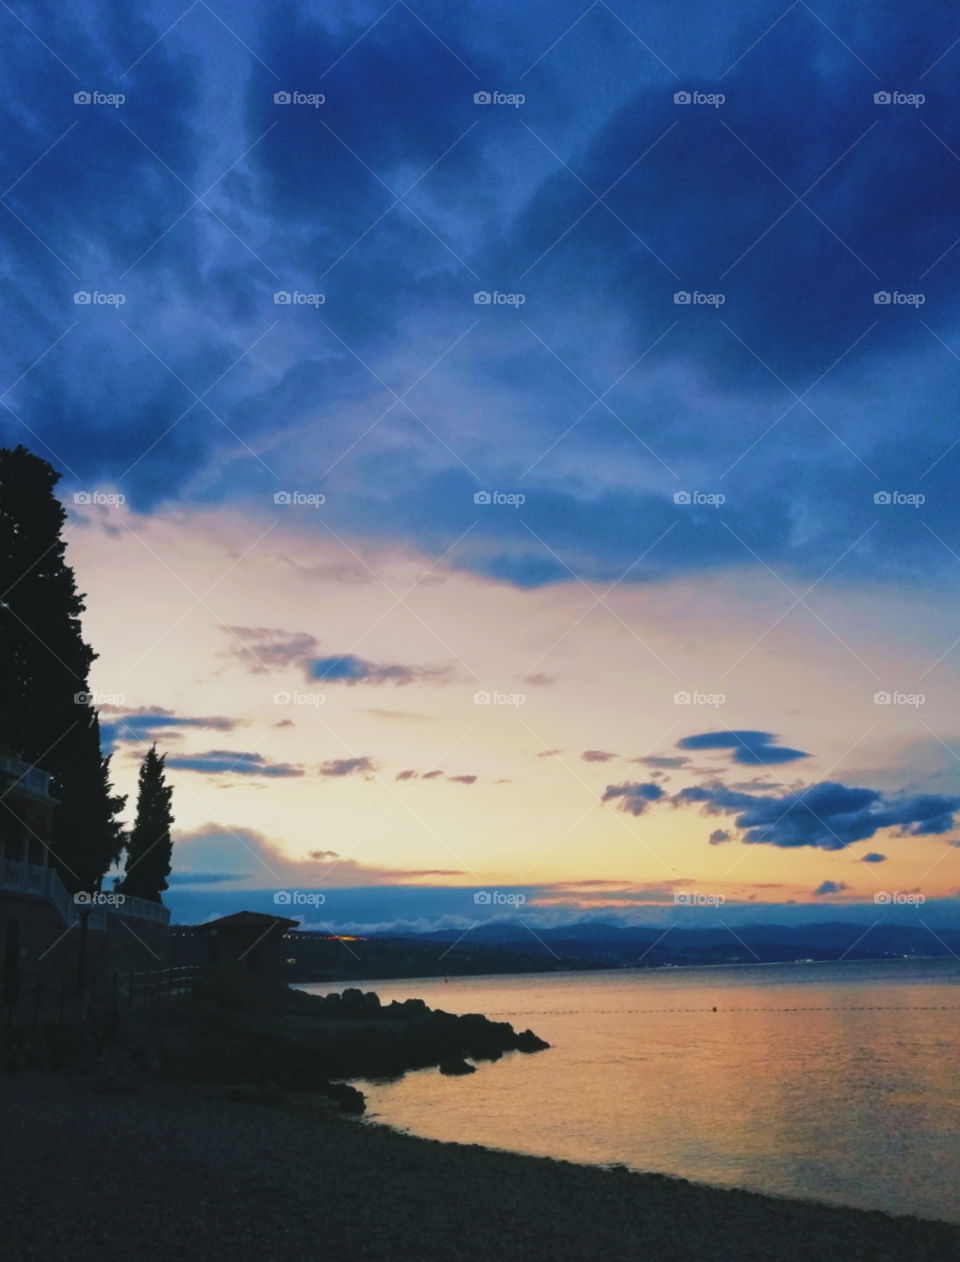 Sunrise in Opatija, Croatia. Filled with many intense colours.